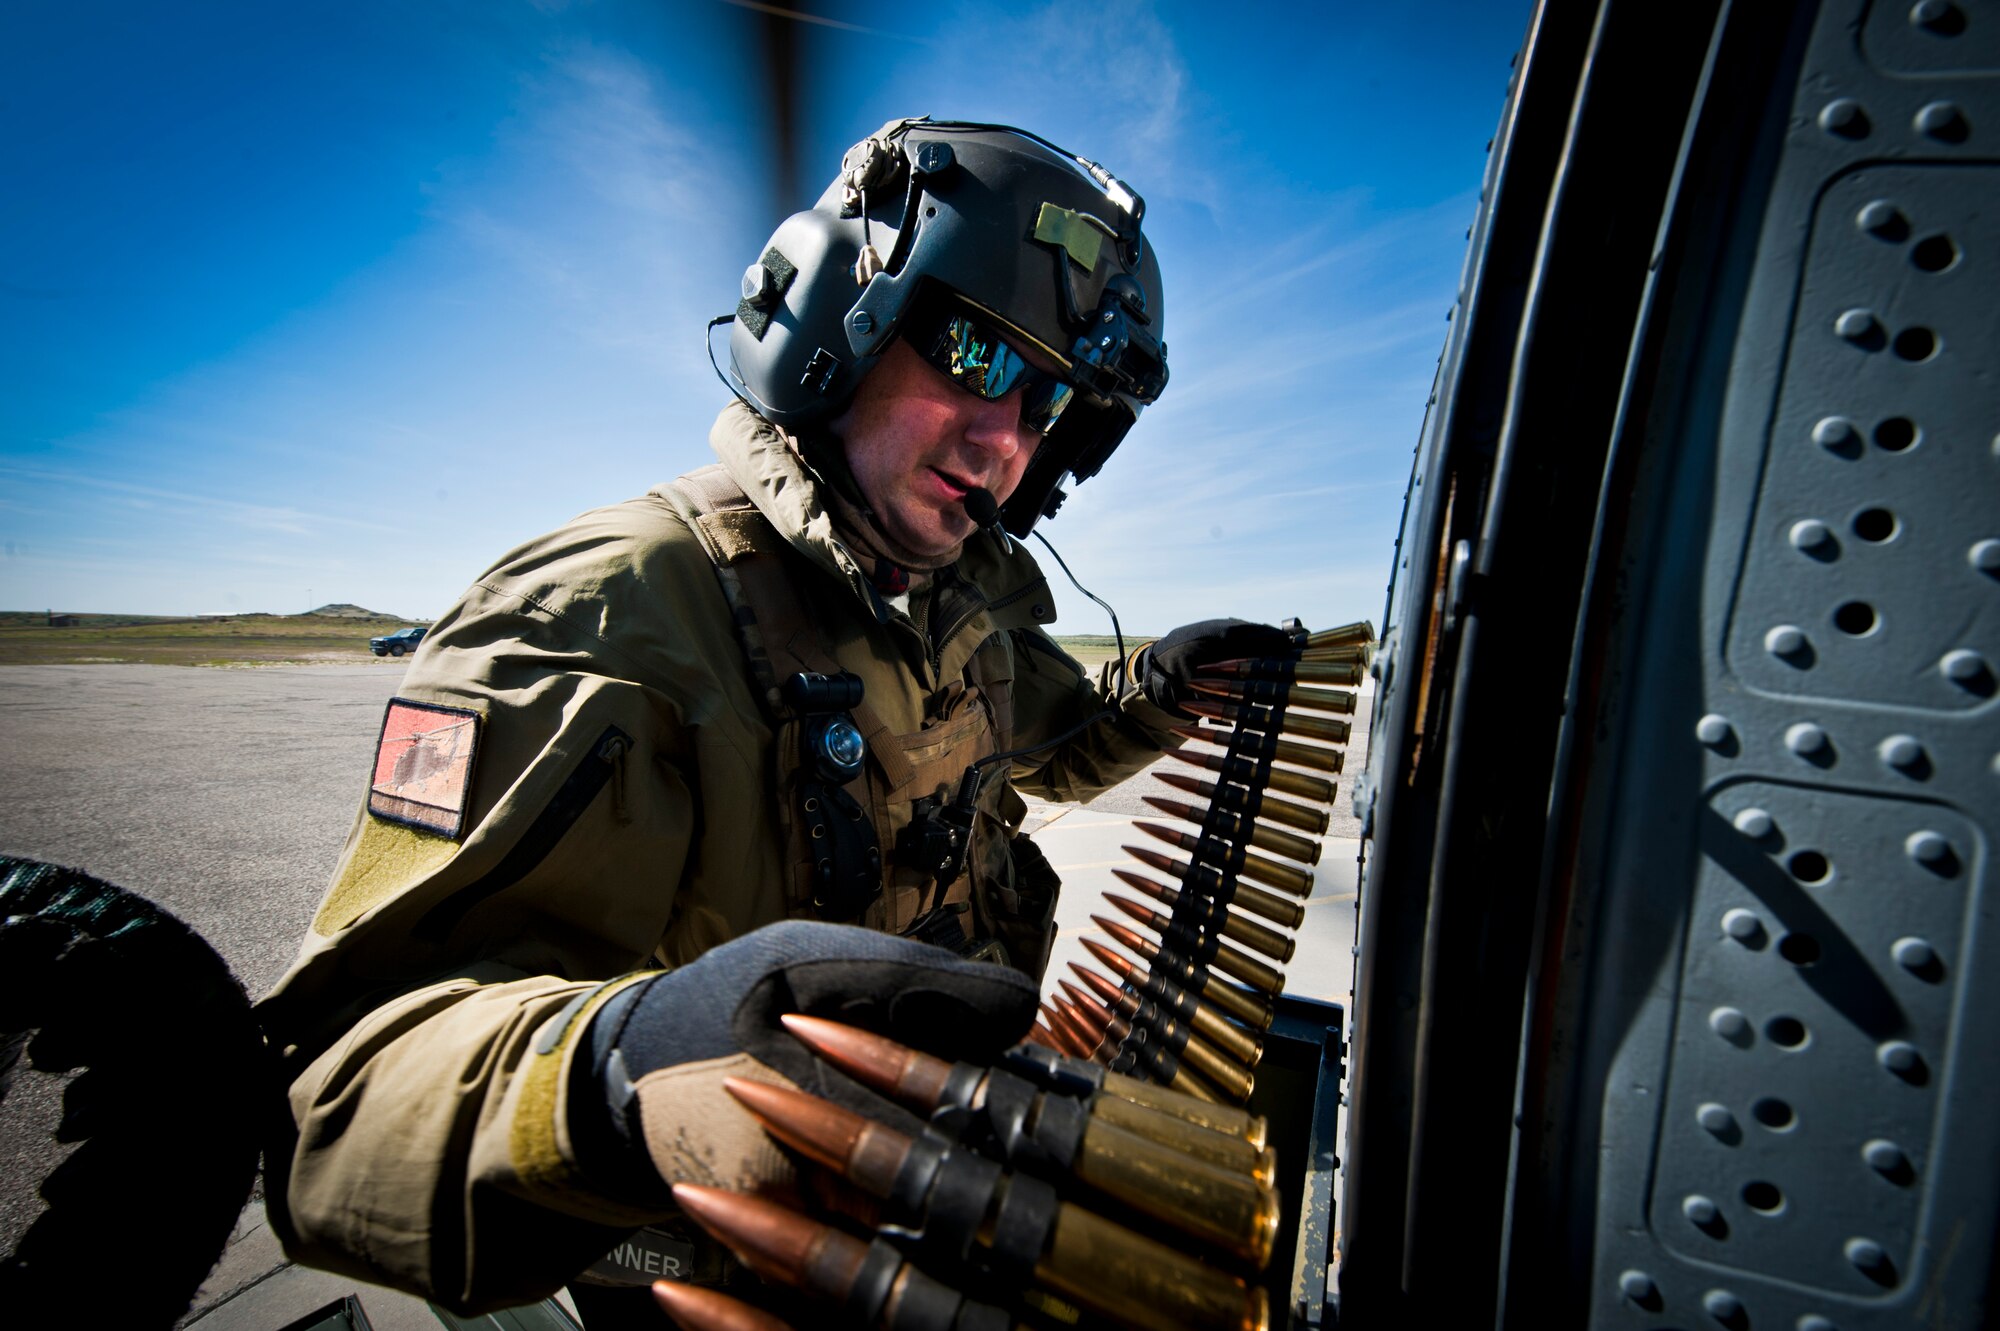 Tech. Sgt. Jeff Waldrup, 34th Weapons Squadron special mission aviator, loads ammunition to an HH-60 Pave Hawk during the terminal employment course, April 29, 2014, at Orchard Combat Training Center, Idaho.  The goal of the U.S. Air Force Weapons School course is to train students to be tactical experts in their combat specialty while also learning the art of battle-space dominance.  (U.S. Air Force Photo by Senior Airman Jason Couillard)